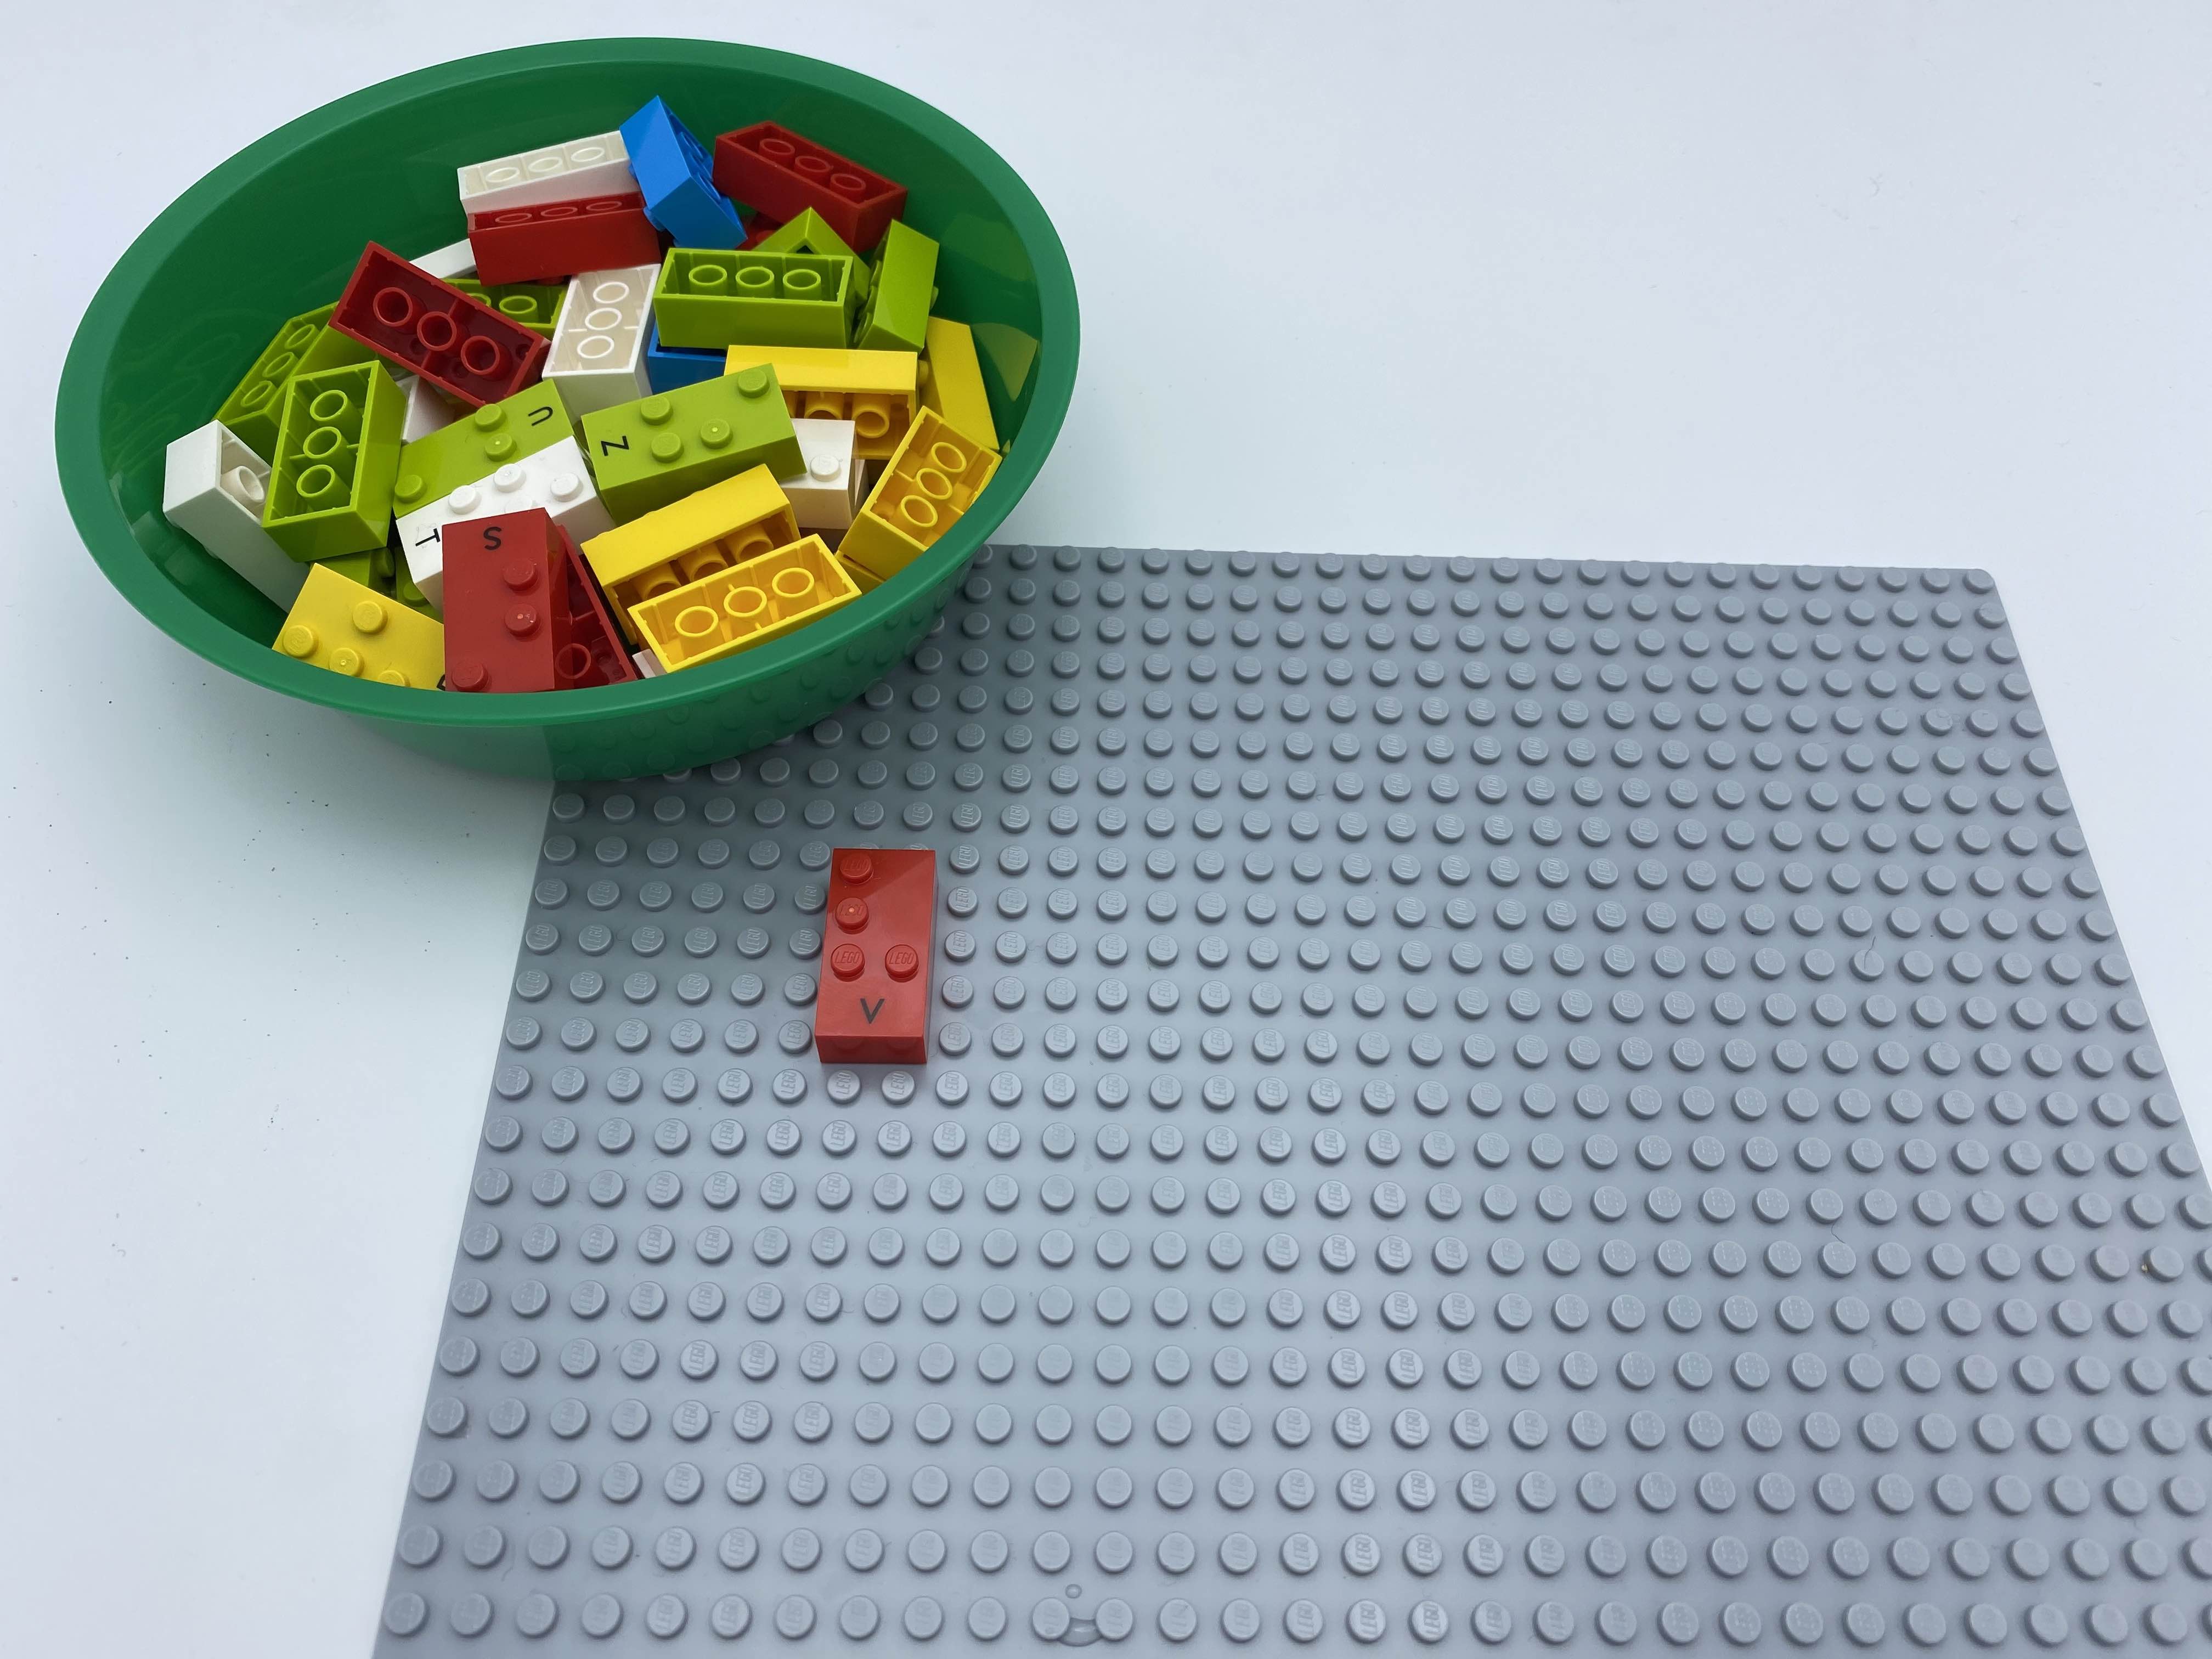 One bricks is attached on the plate, the others are in the bowl